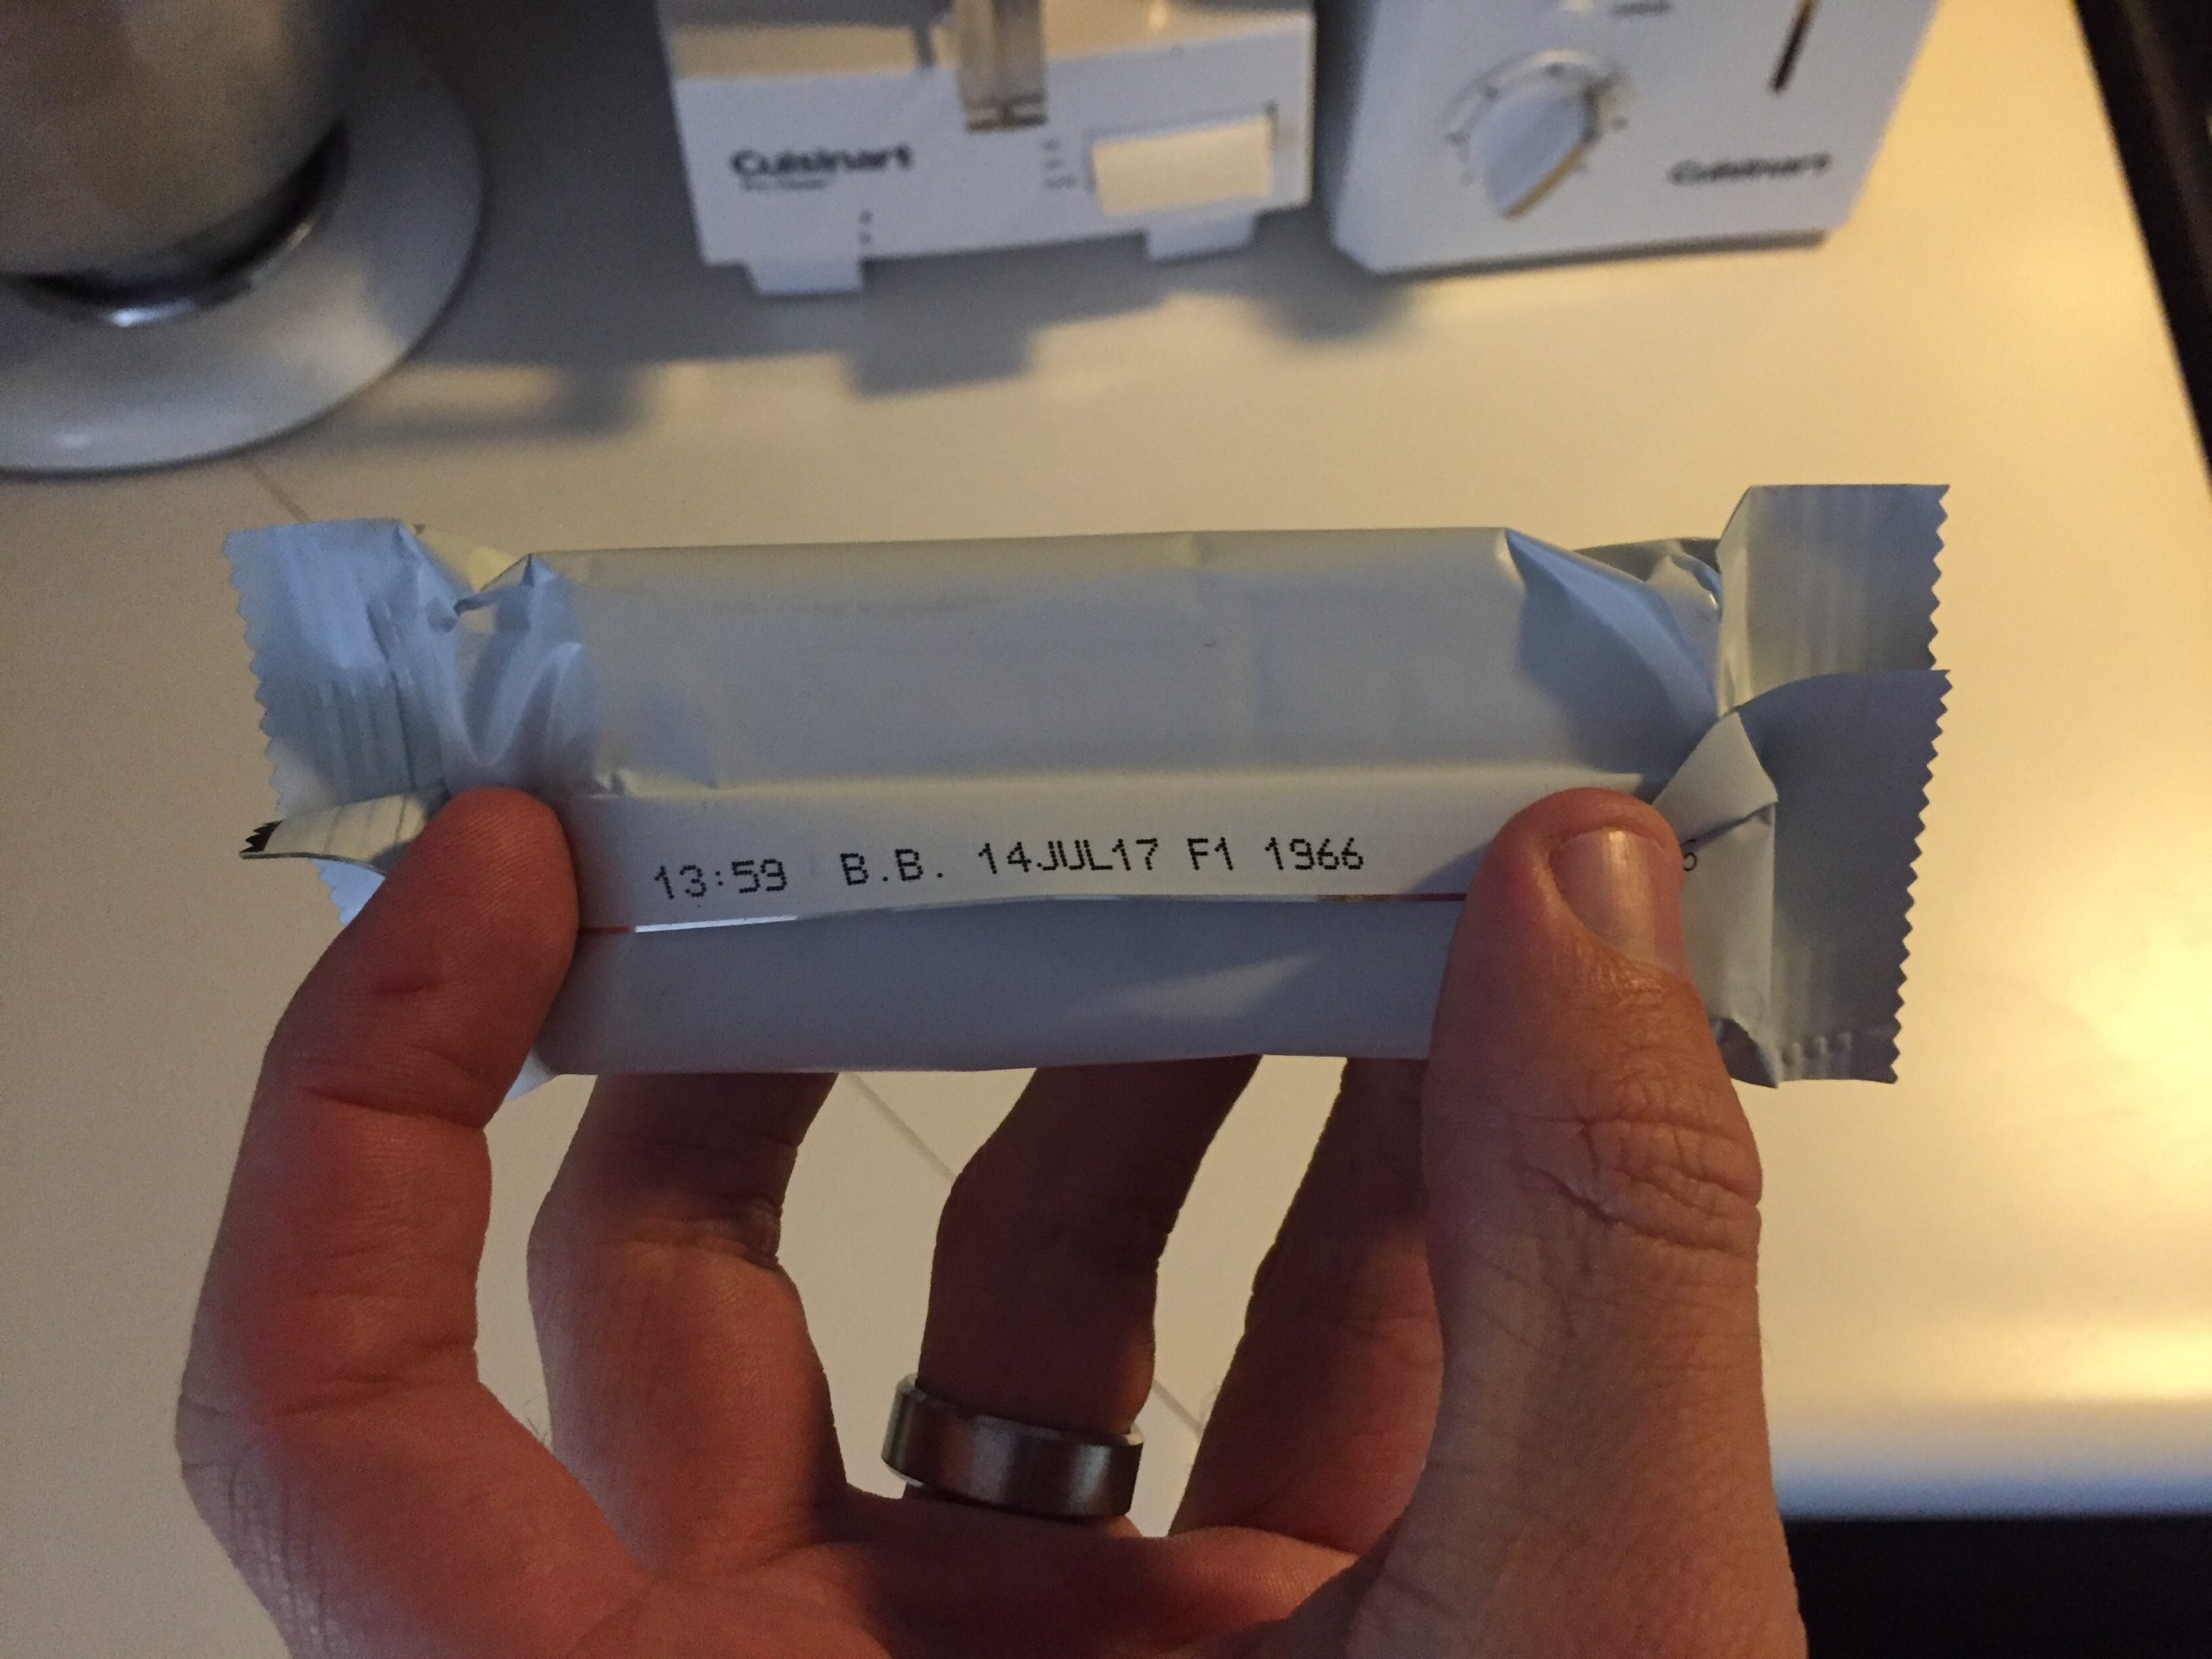 More Details Emerge About The Soylent Food Bars Making People Sick